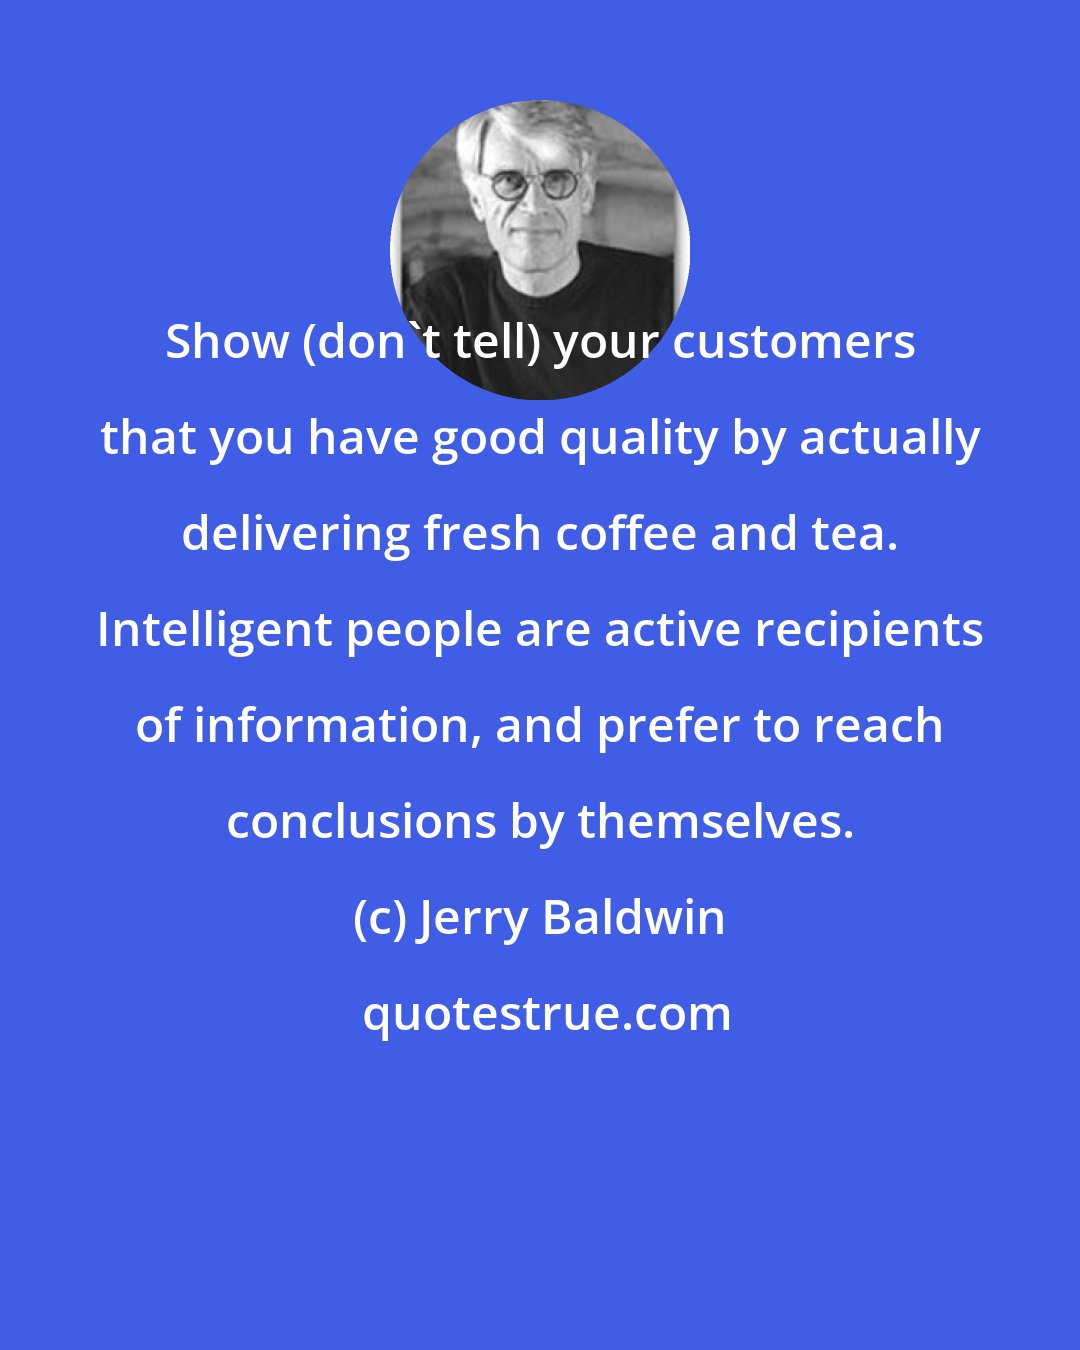 Jerry Baldwin: Show (don't tell) your customers that you have good quality by actually delivering fresh coffee and tea. Intelligent people are active recipients of information, and prefer to reach conclusions by themselves.